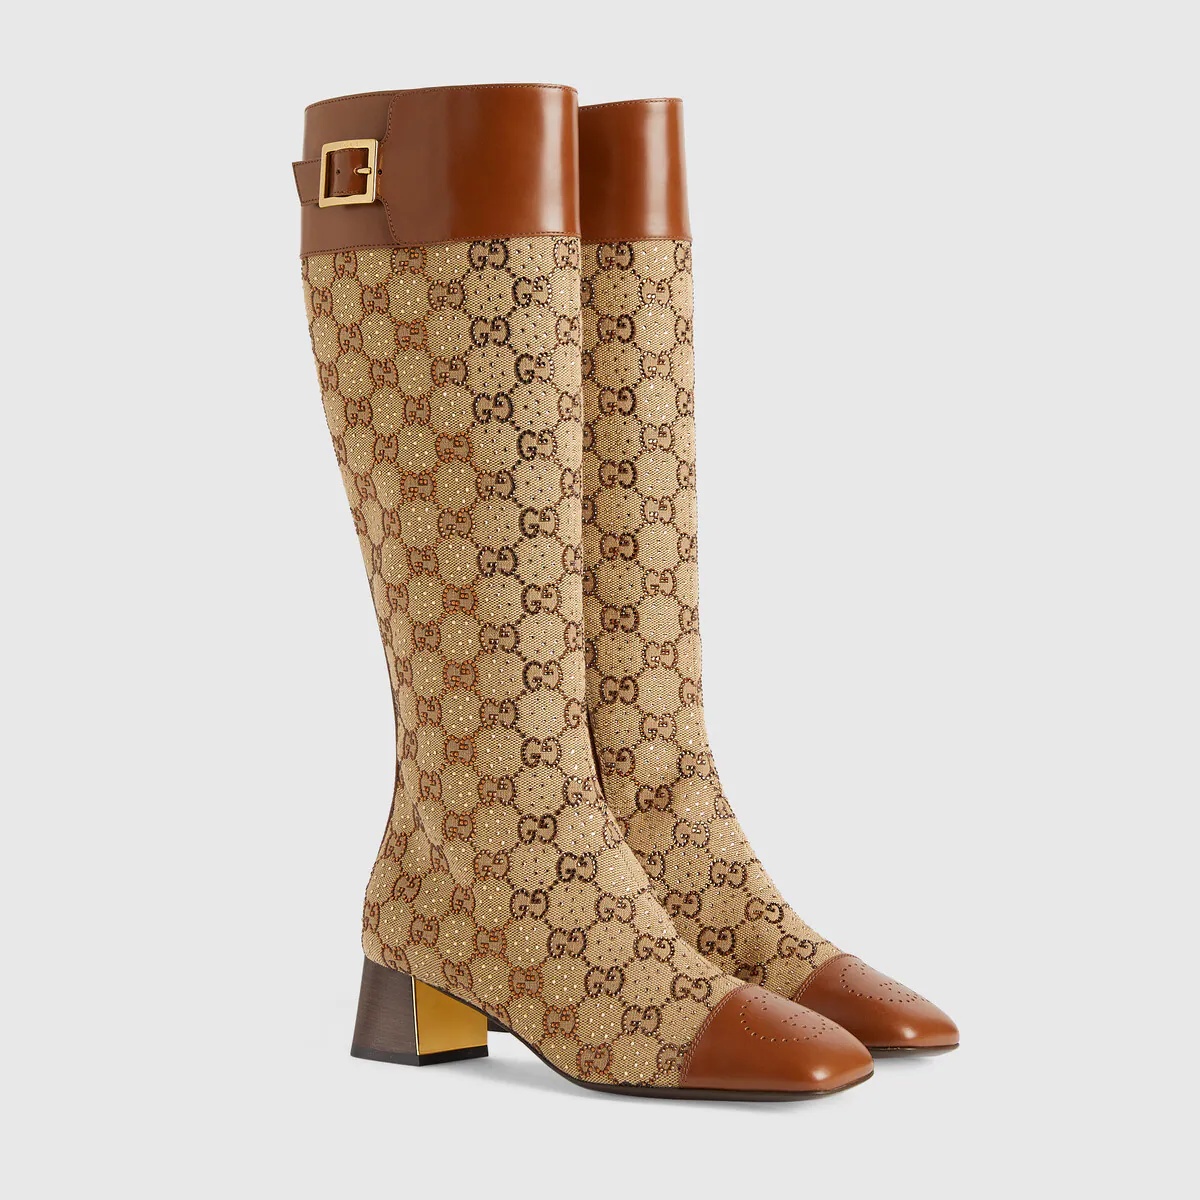 GUCCI Women's boot with crystals | REVERSIBLE